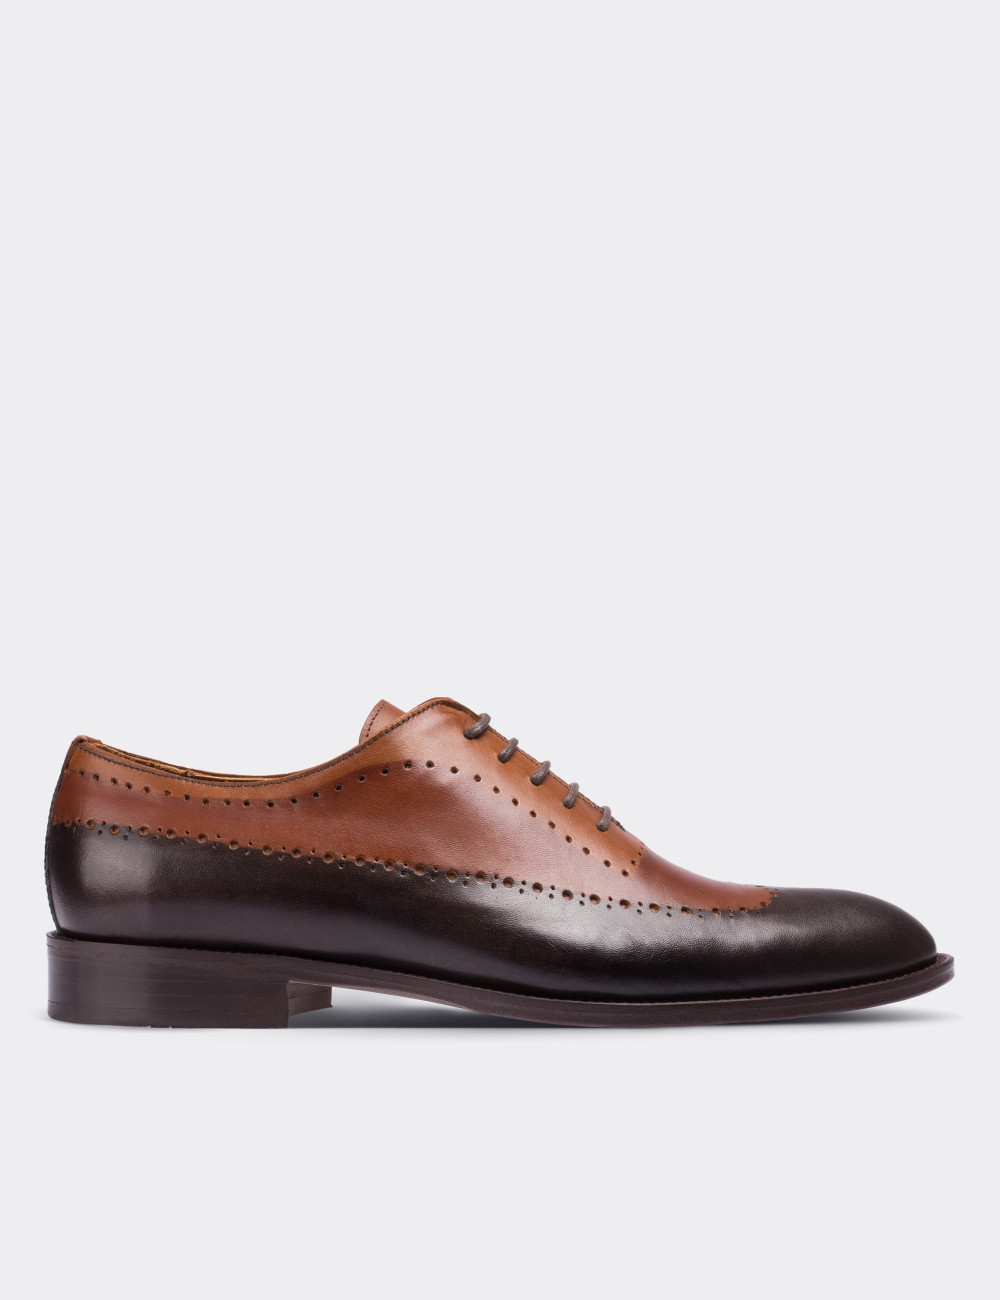 Brown Leather Classic Shoes - Deery